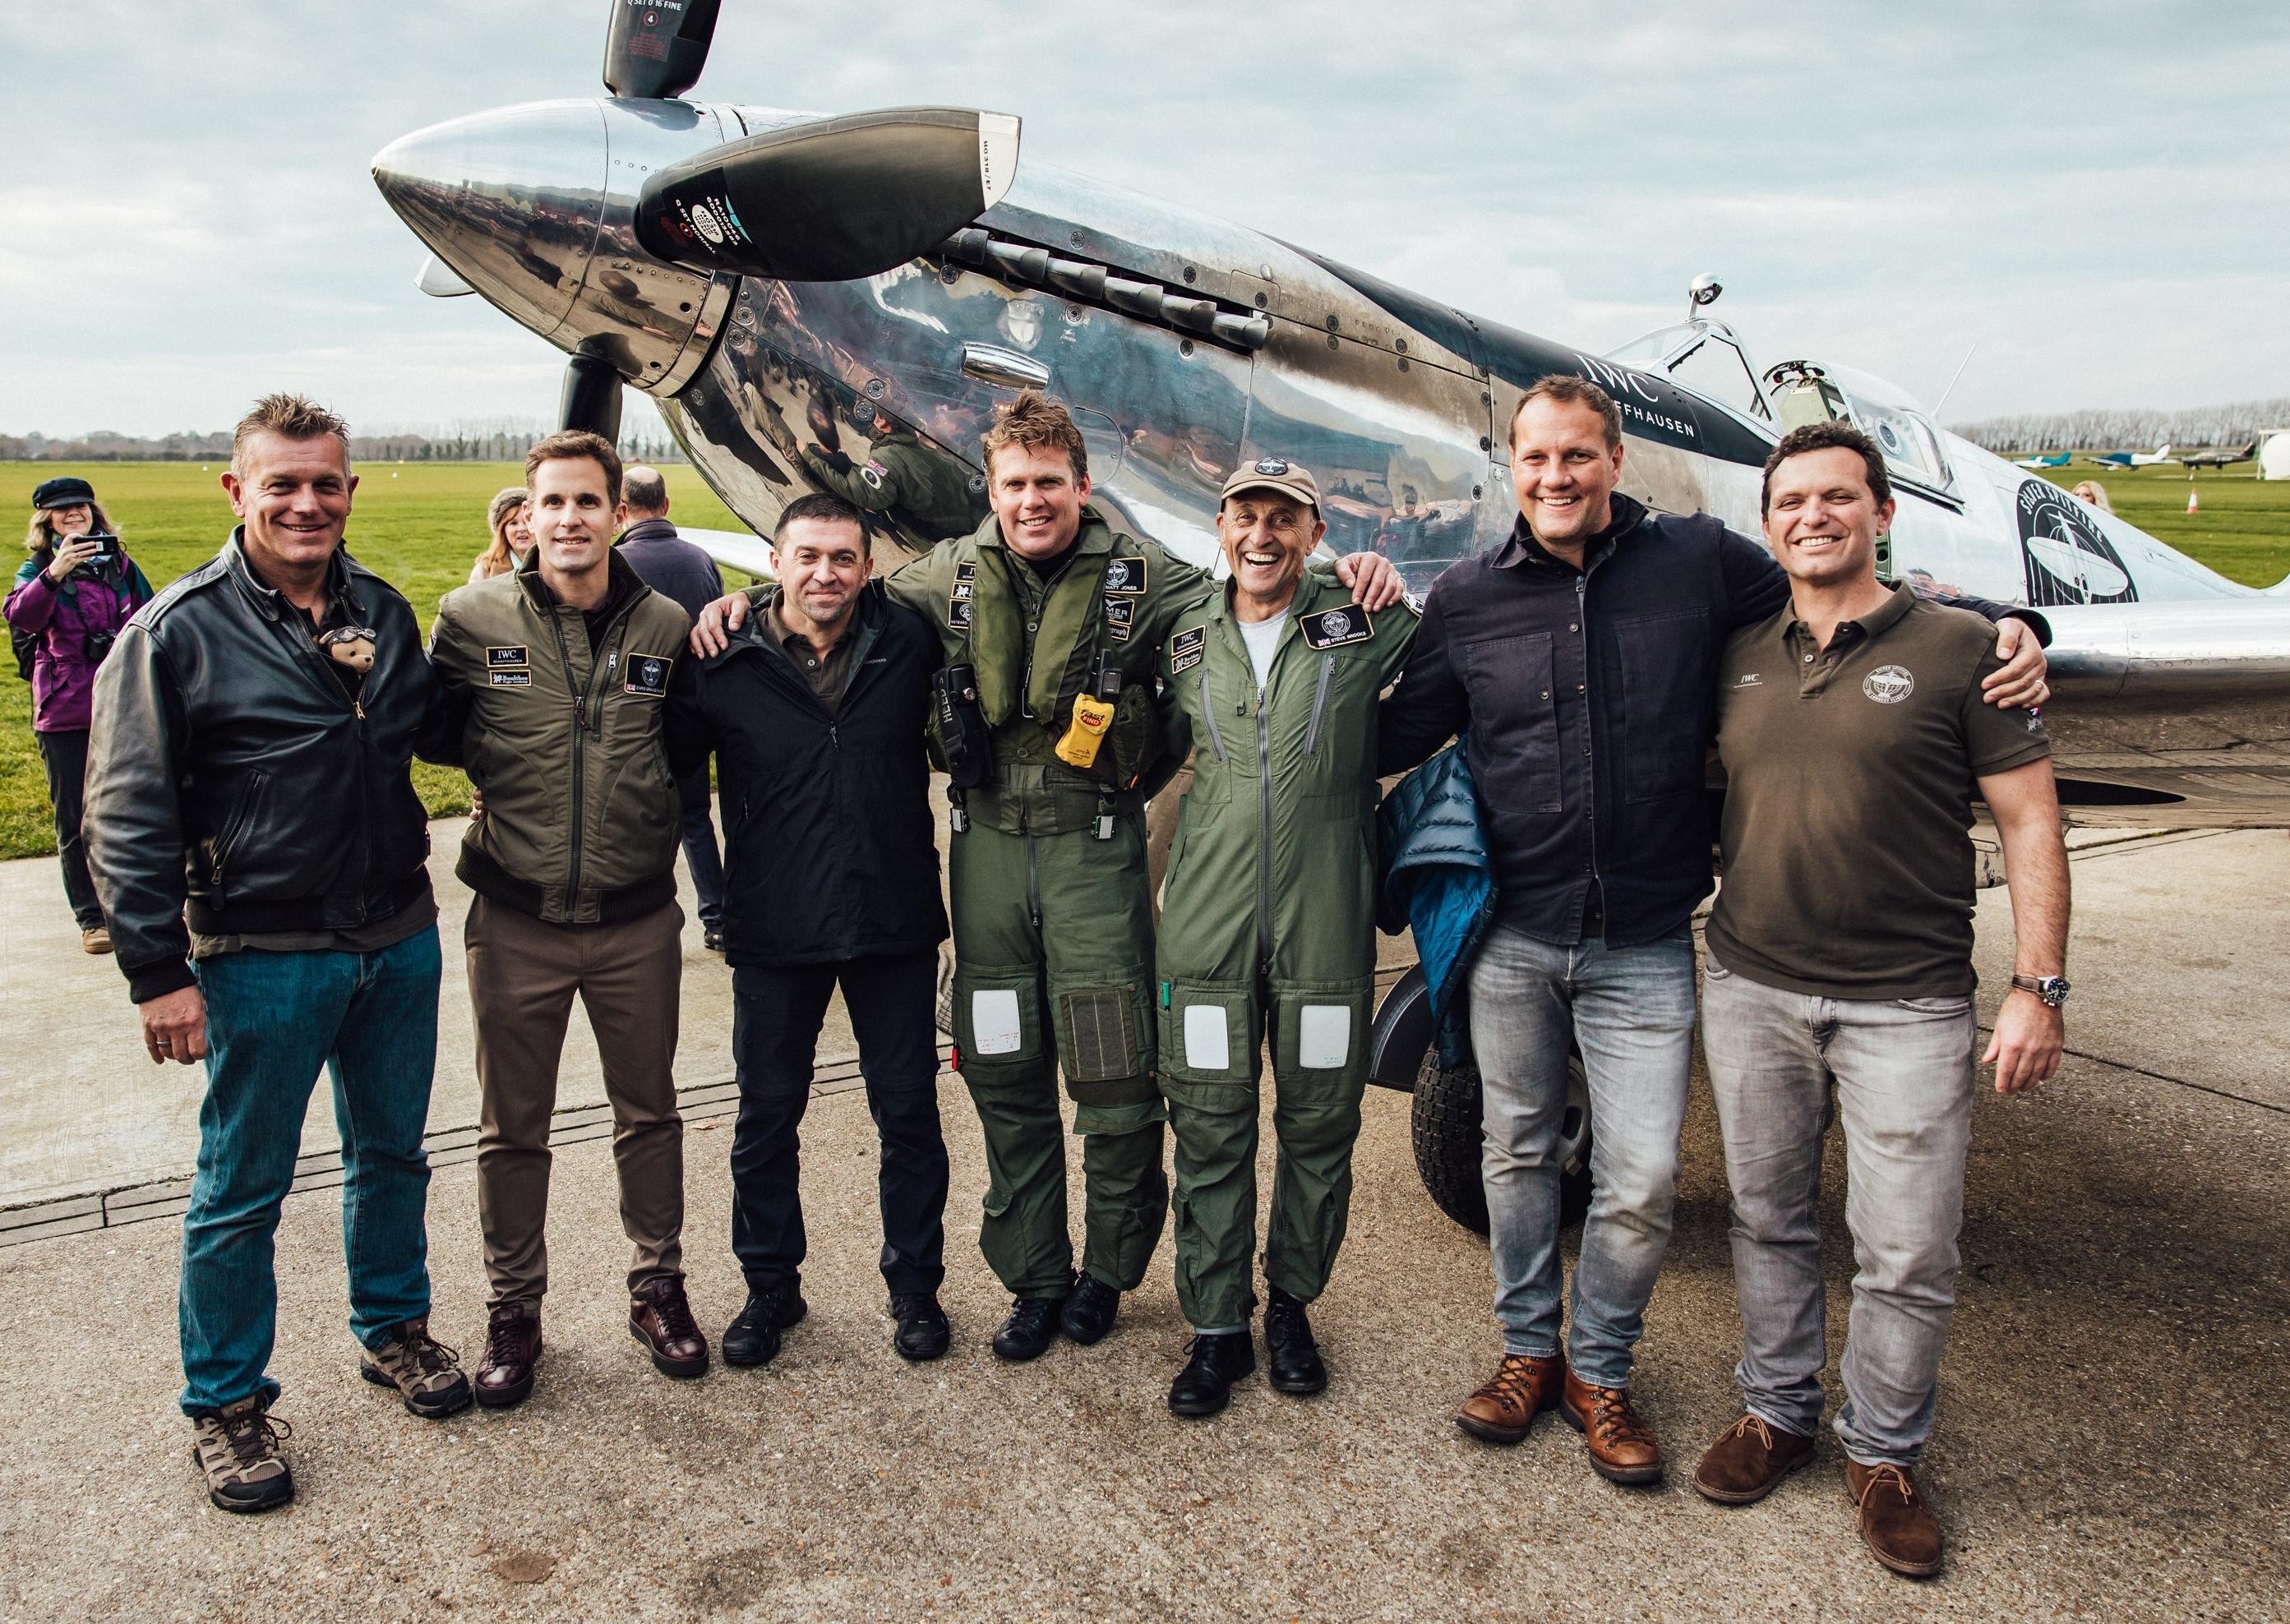 Two Goodwood pilots have landed back home after flying a Silver Spitfire around the world in four months. Photo by Christopher Busch for IWC Schaffhausen SUS-190512-175612001